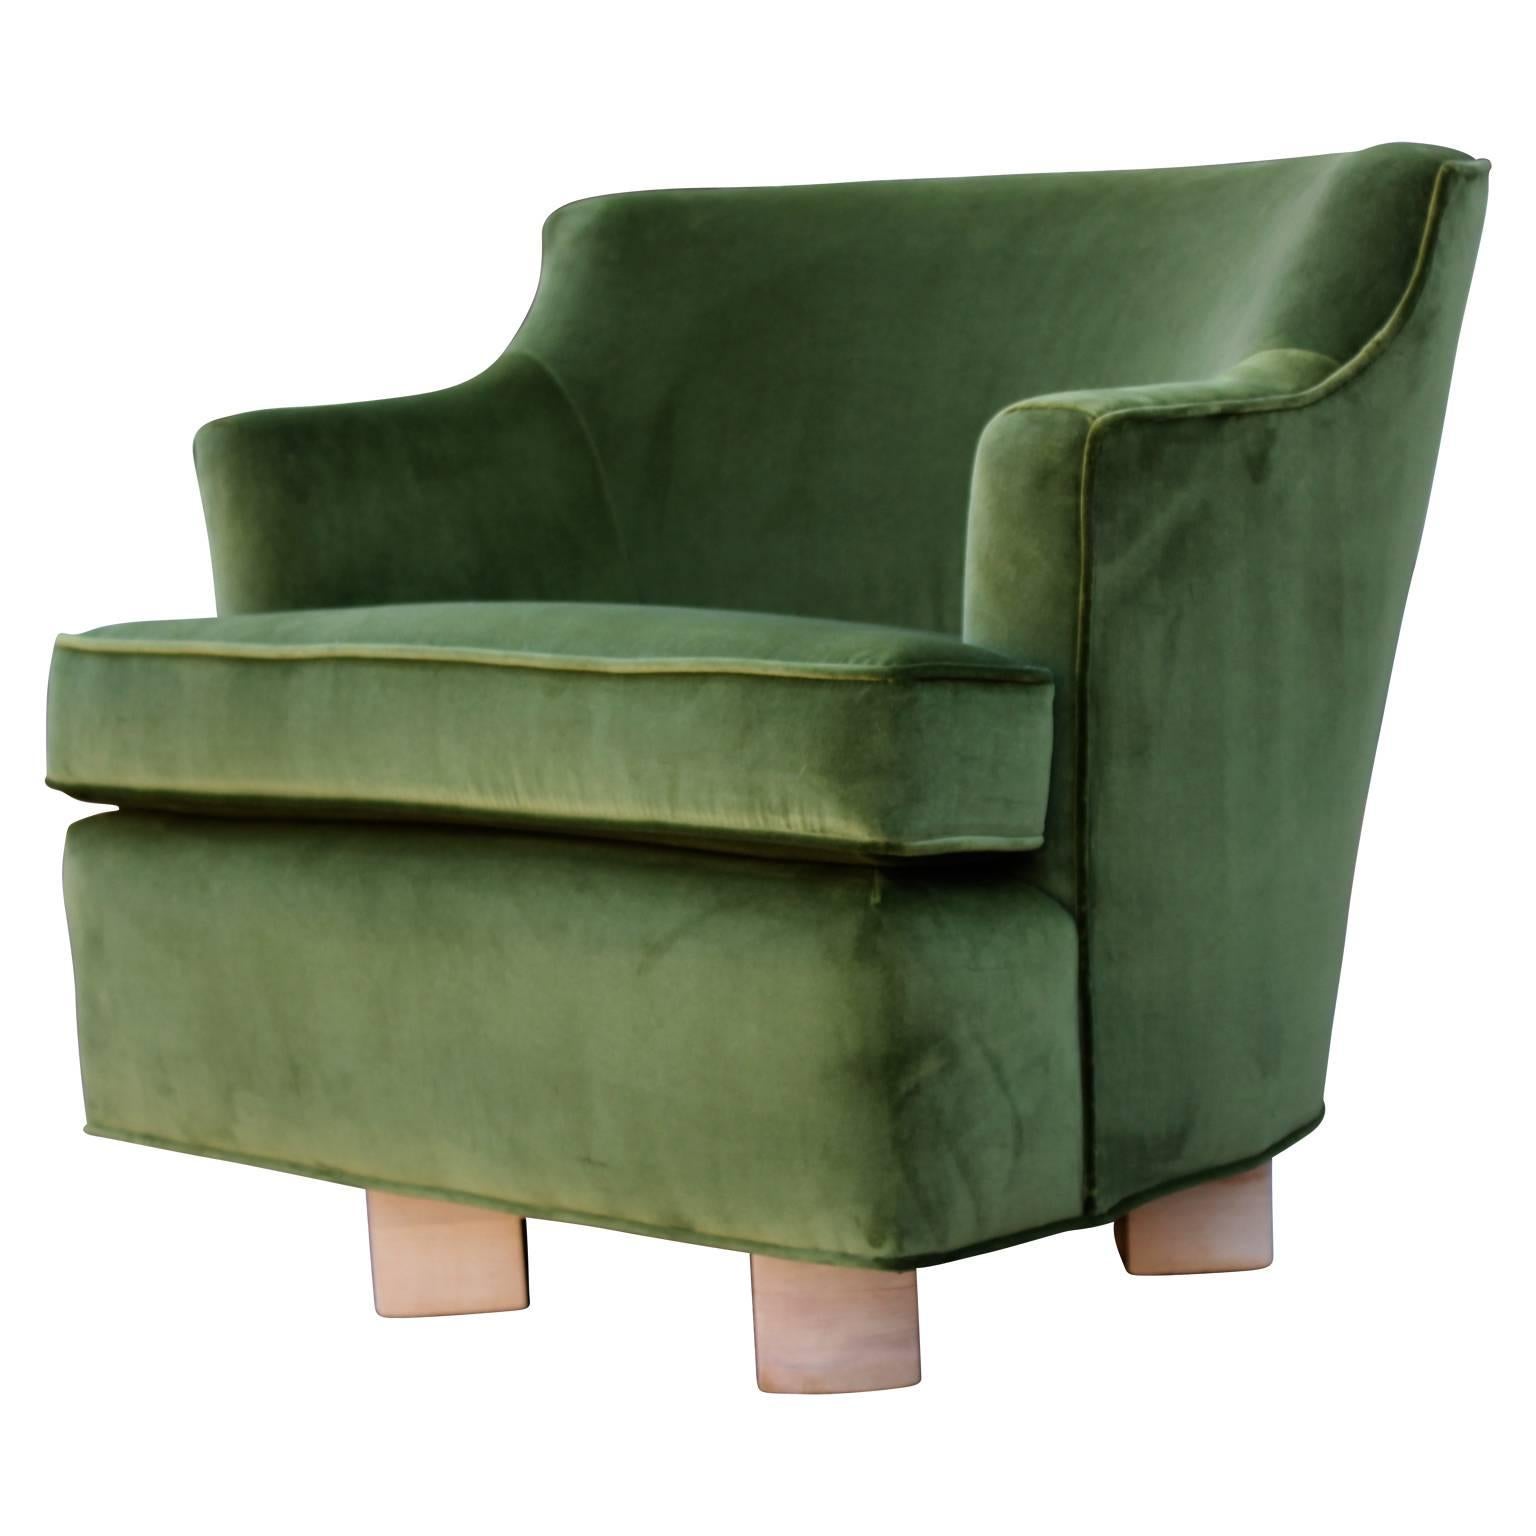 Mid-20th Century Modern Green Velvet Swivel Lounge Chair with Bleached Wood Base